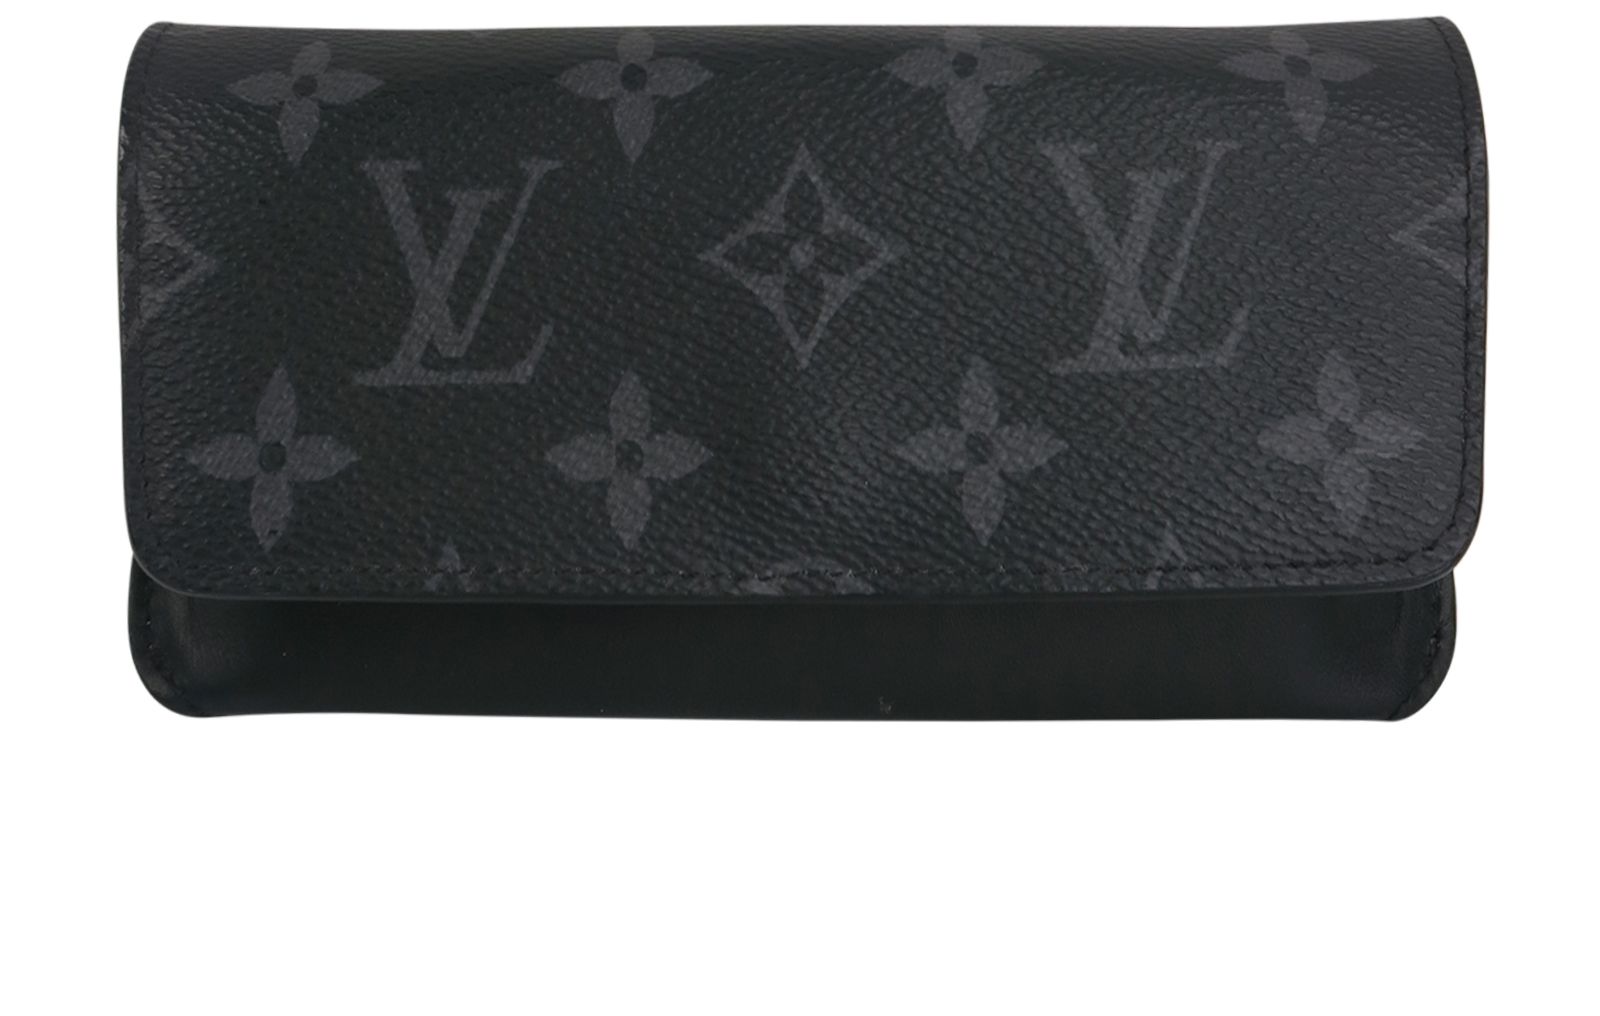 NEW LOUIS VUITTON SUNGLASSES CASE + DUSTCOVER + OUTER BOX, 6.5” x 3” x 2.4”